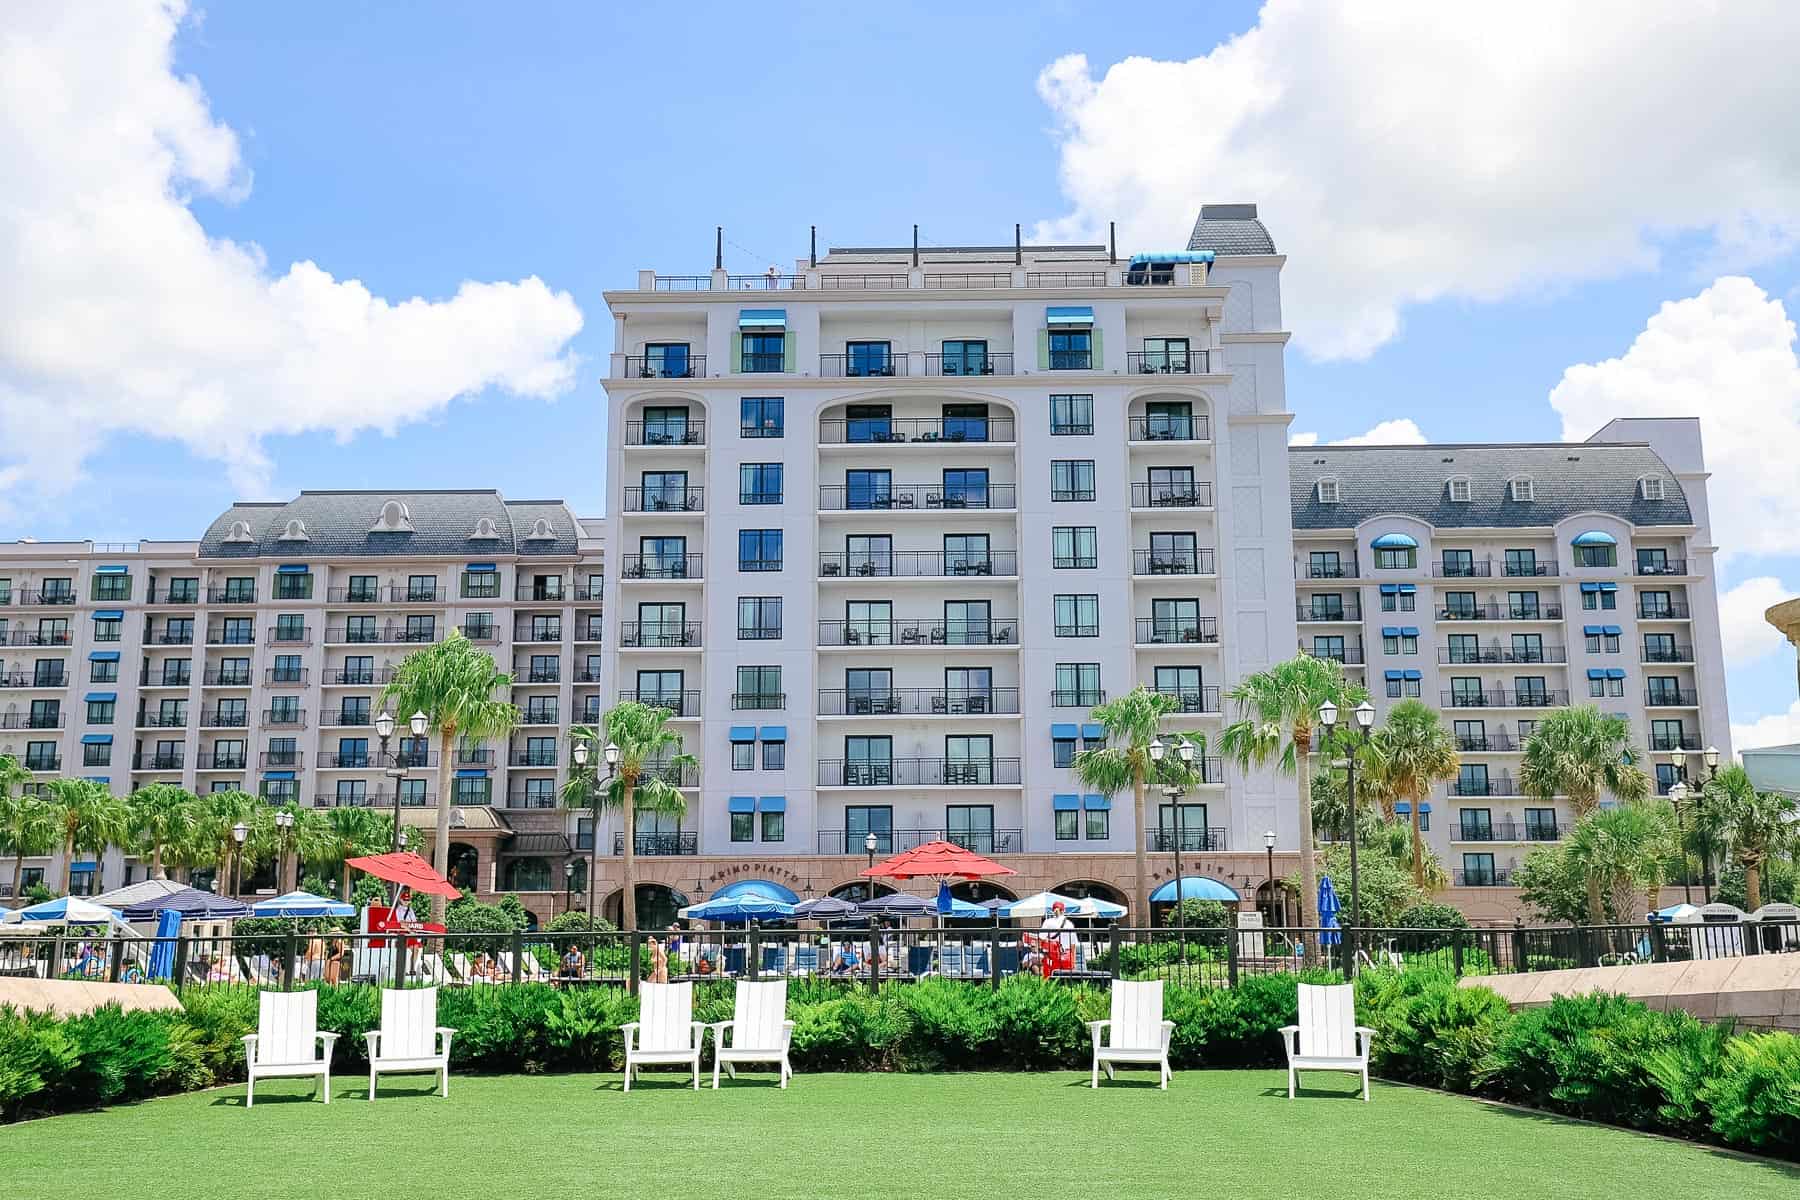 Disney's Riviera with the green lawn and white lawn chairs 